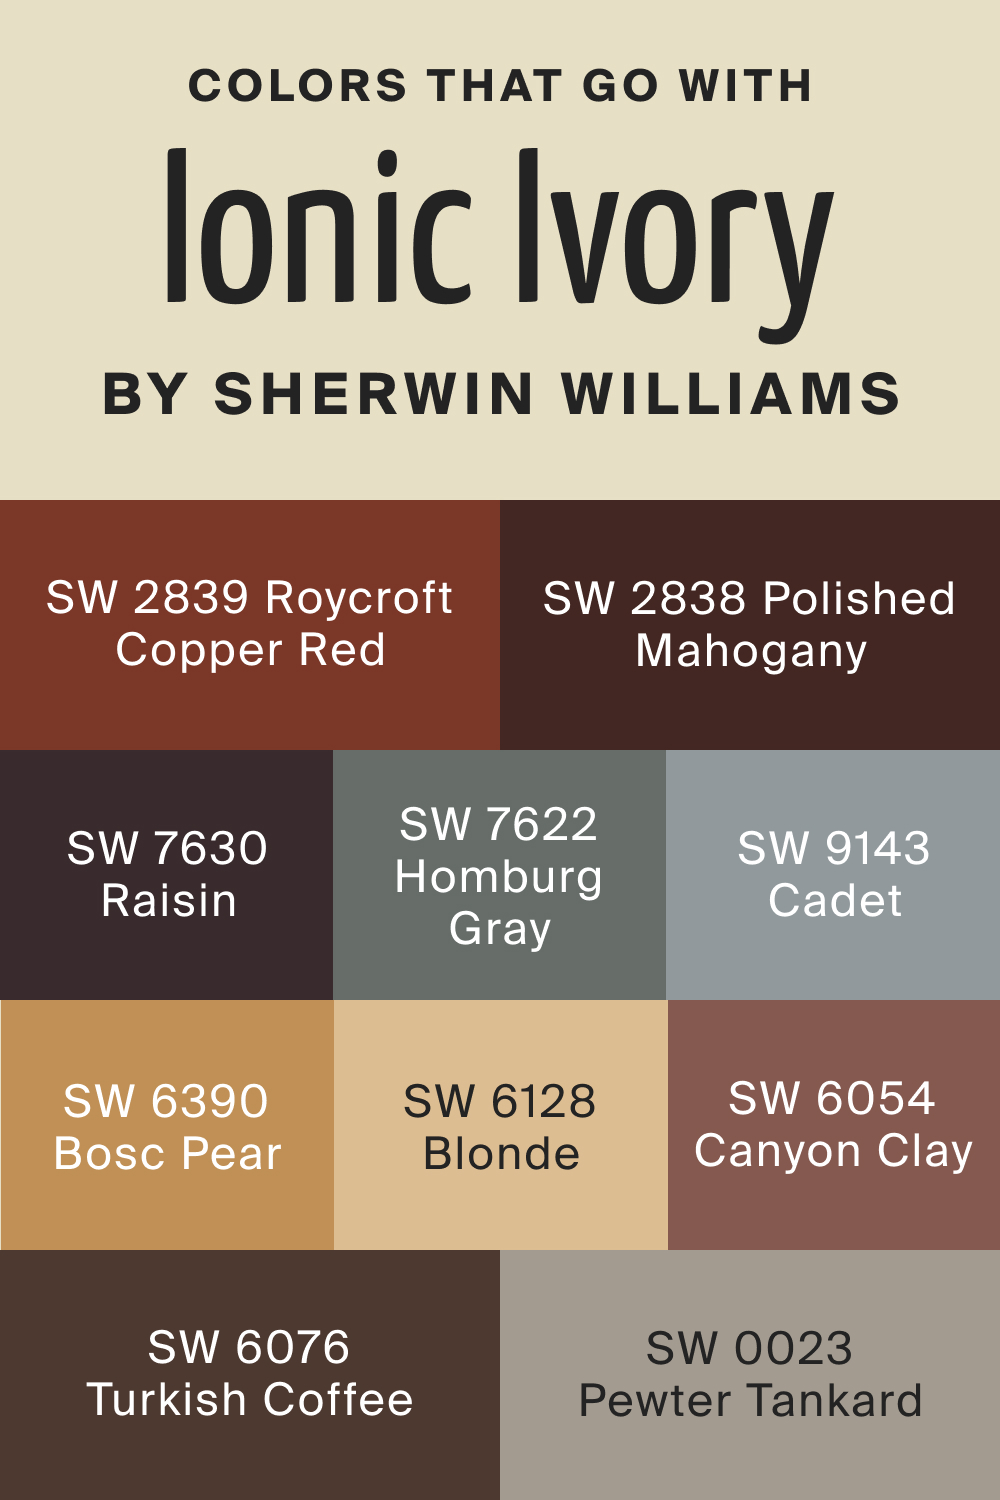 Colors that goes with SW 6406 Ionic Ivory by Sherwin Williams